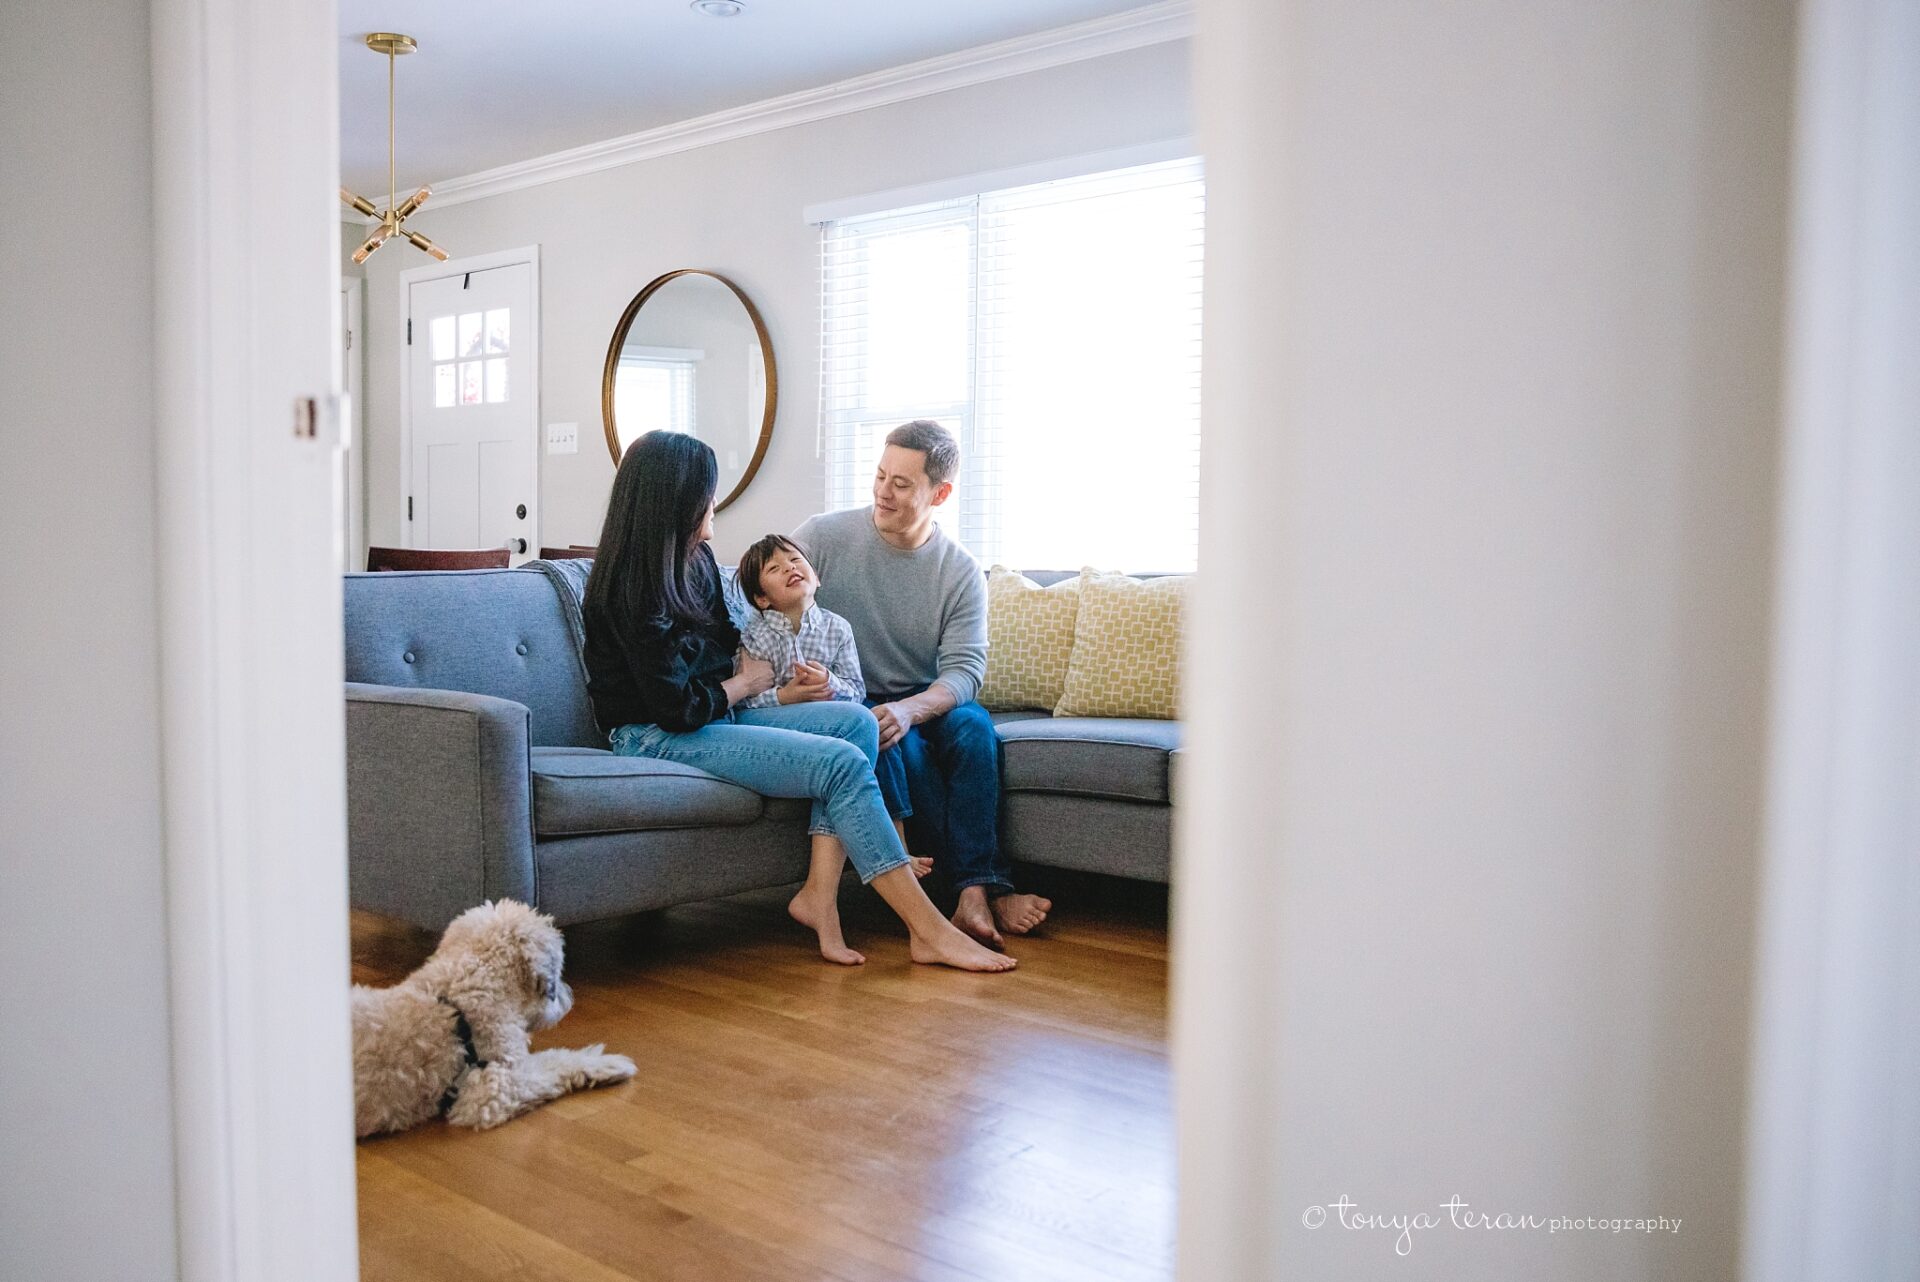 in-home family photo session in washington, dc - dc in-home family photographer